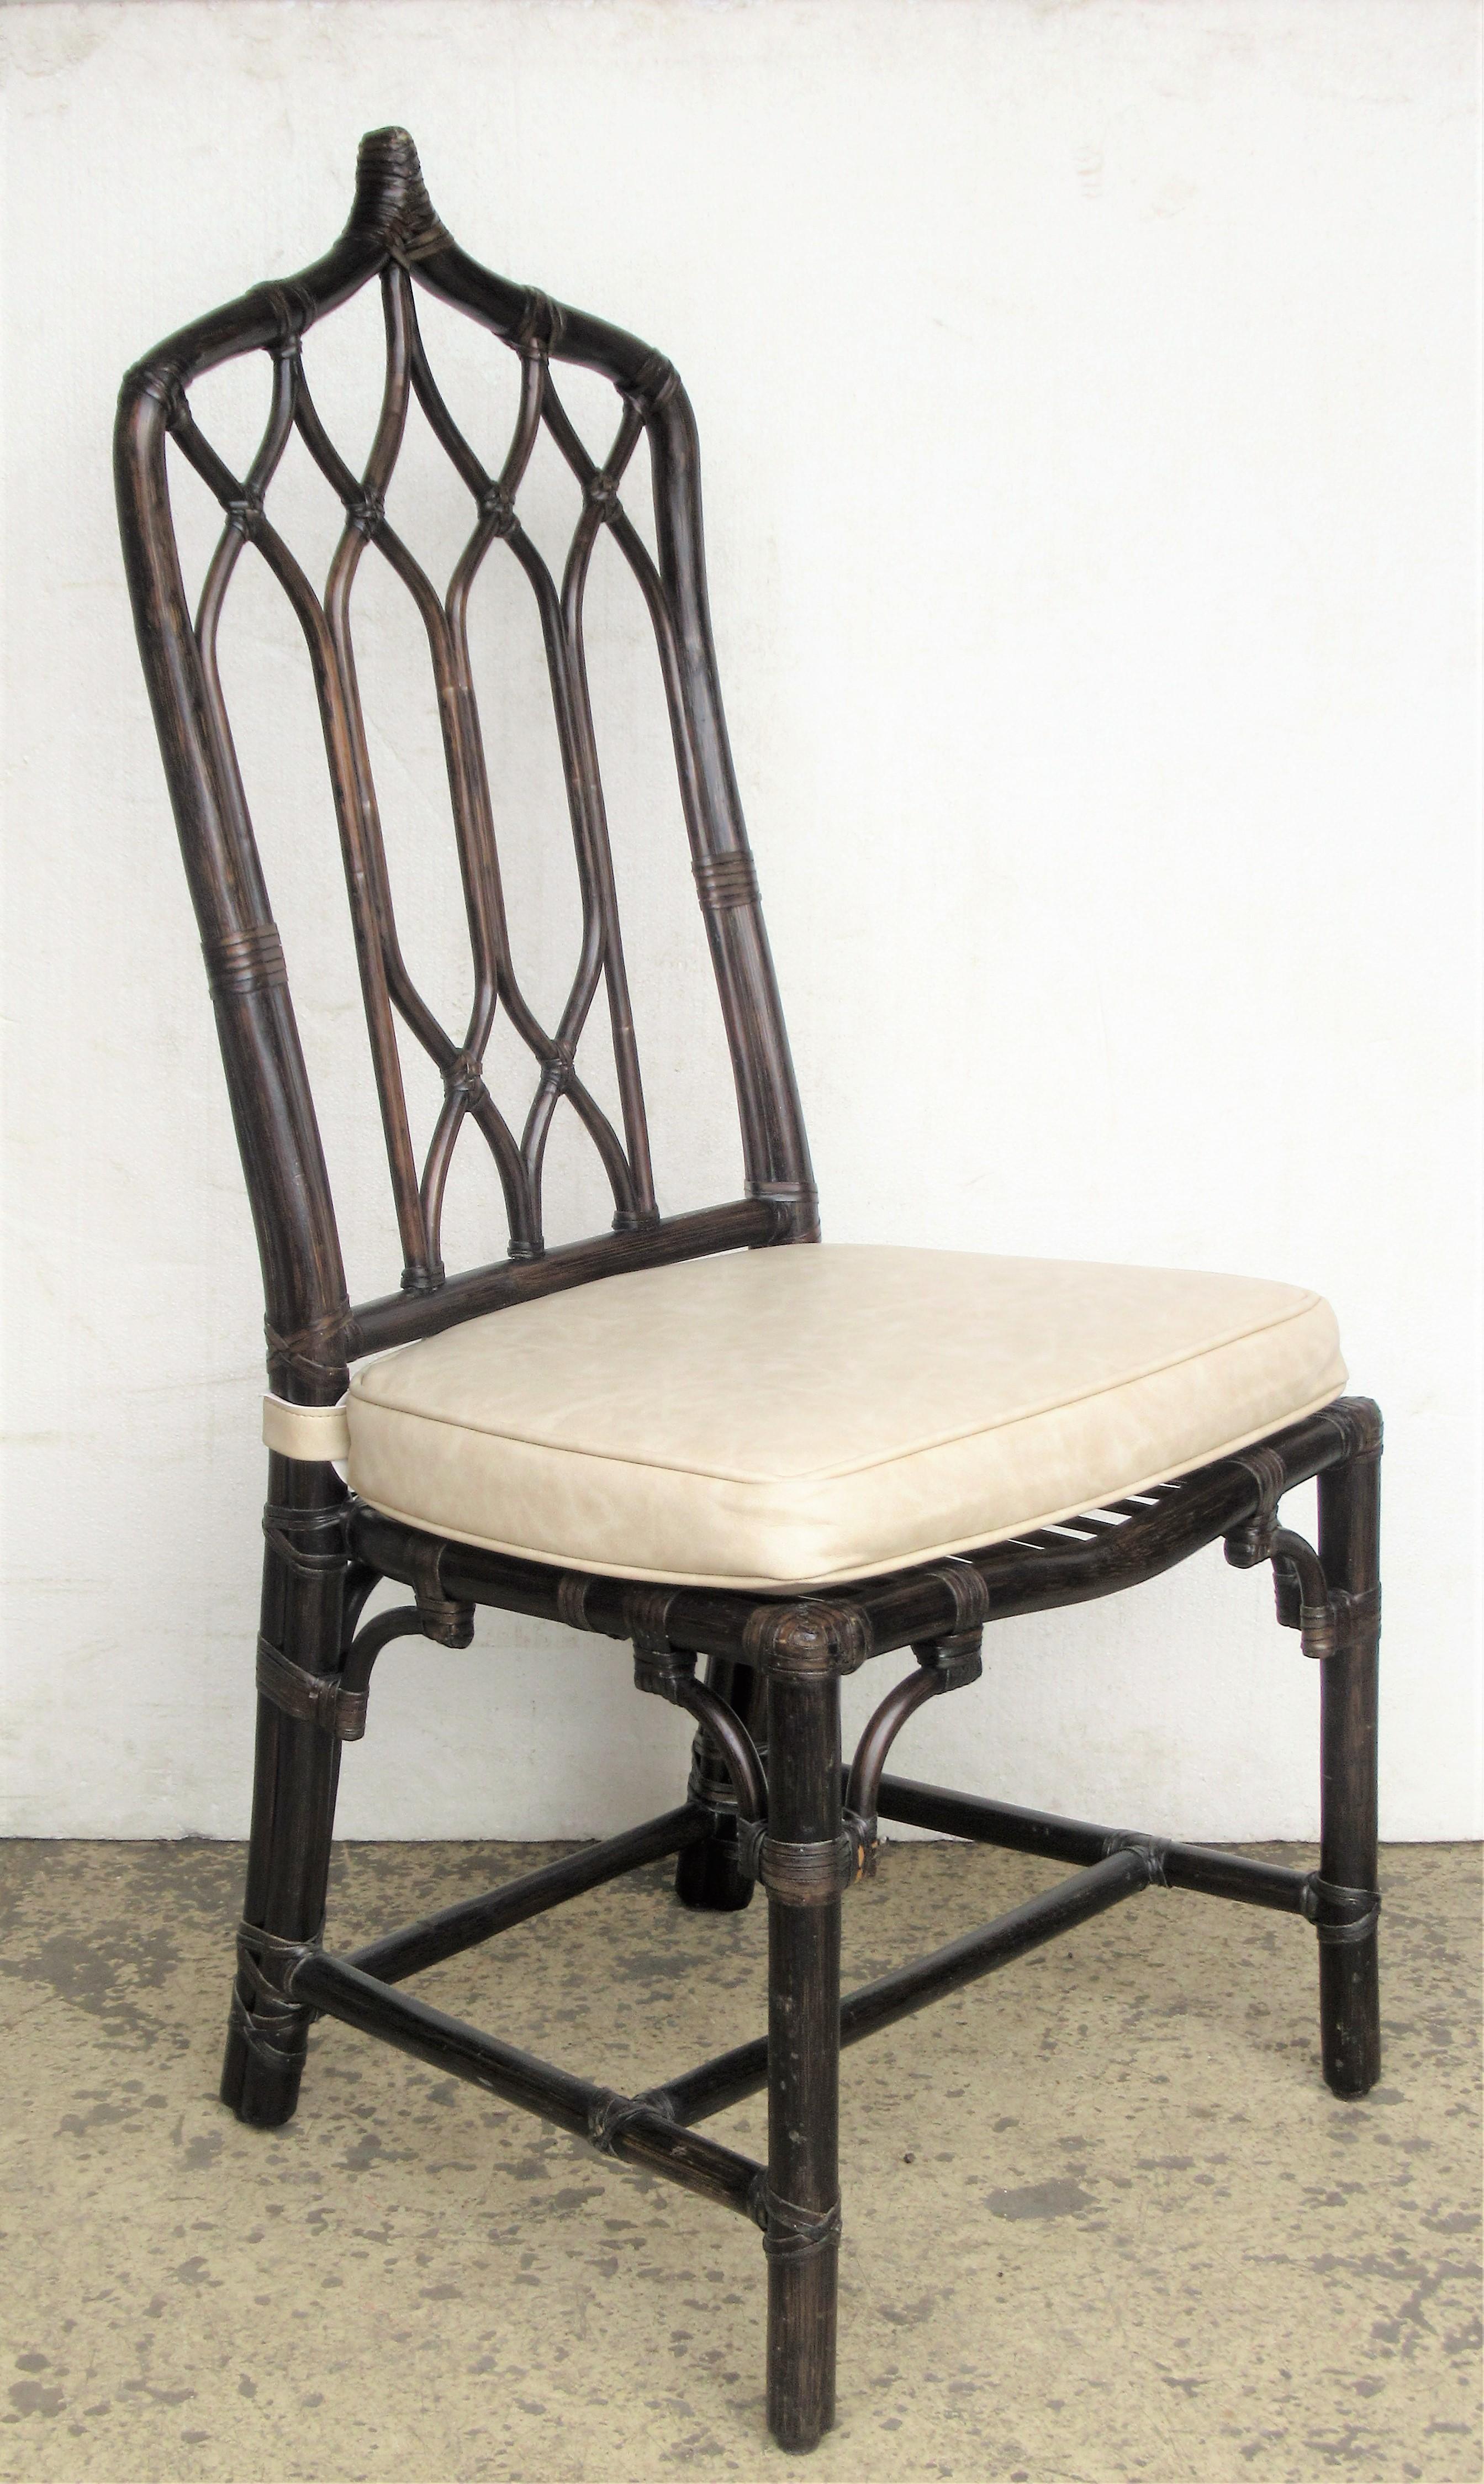 20th Century Peak Top Bamboo Rattan Chairs by McGuire